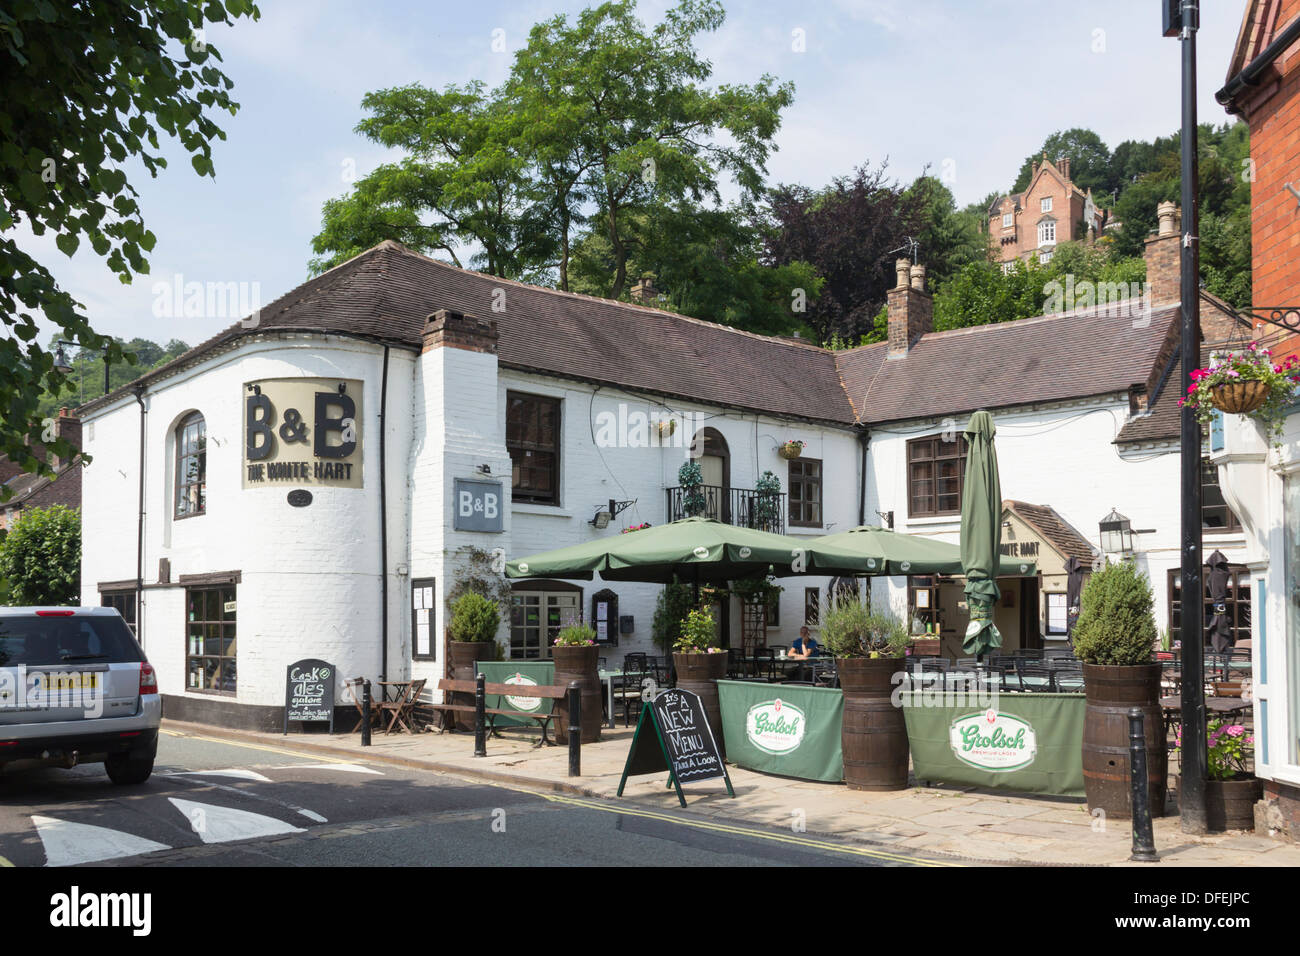 The White Hart, pub restaurant and small hotel on The Wharfage, Ironbridge, Shropshire. The building dates to the 18th century. Stock Photo